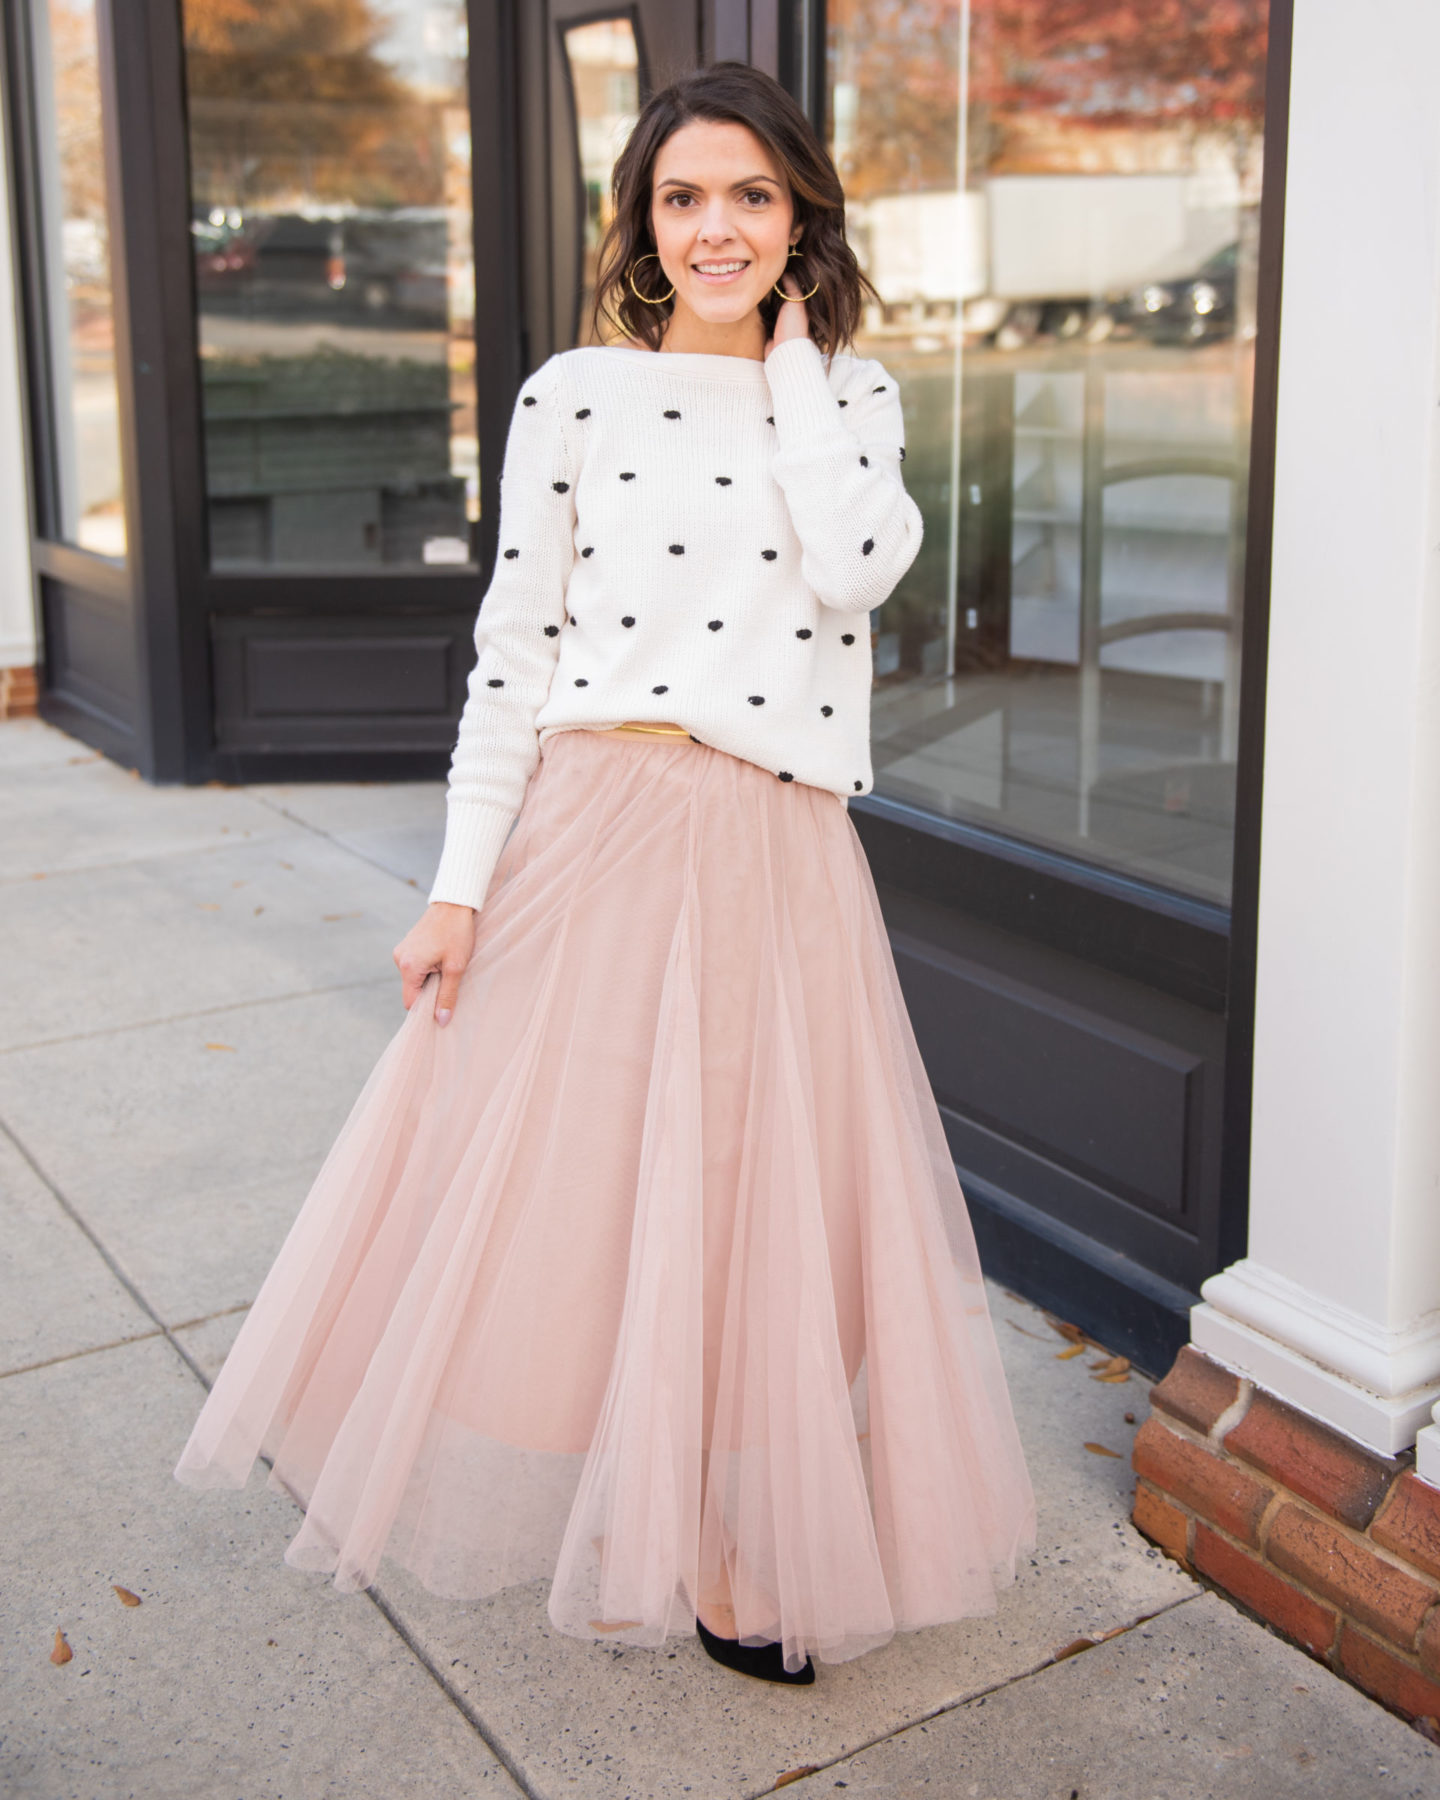 Ways To Style A Tulle Skirt The Sarah Stories